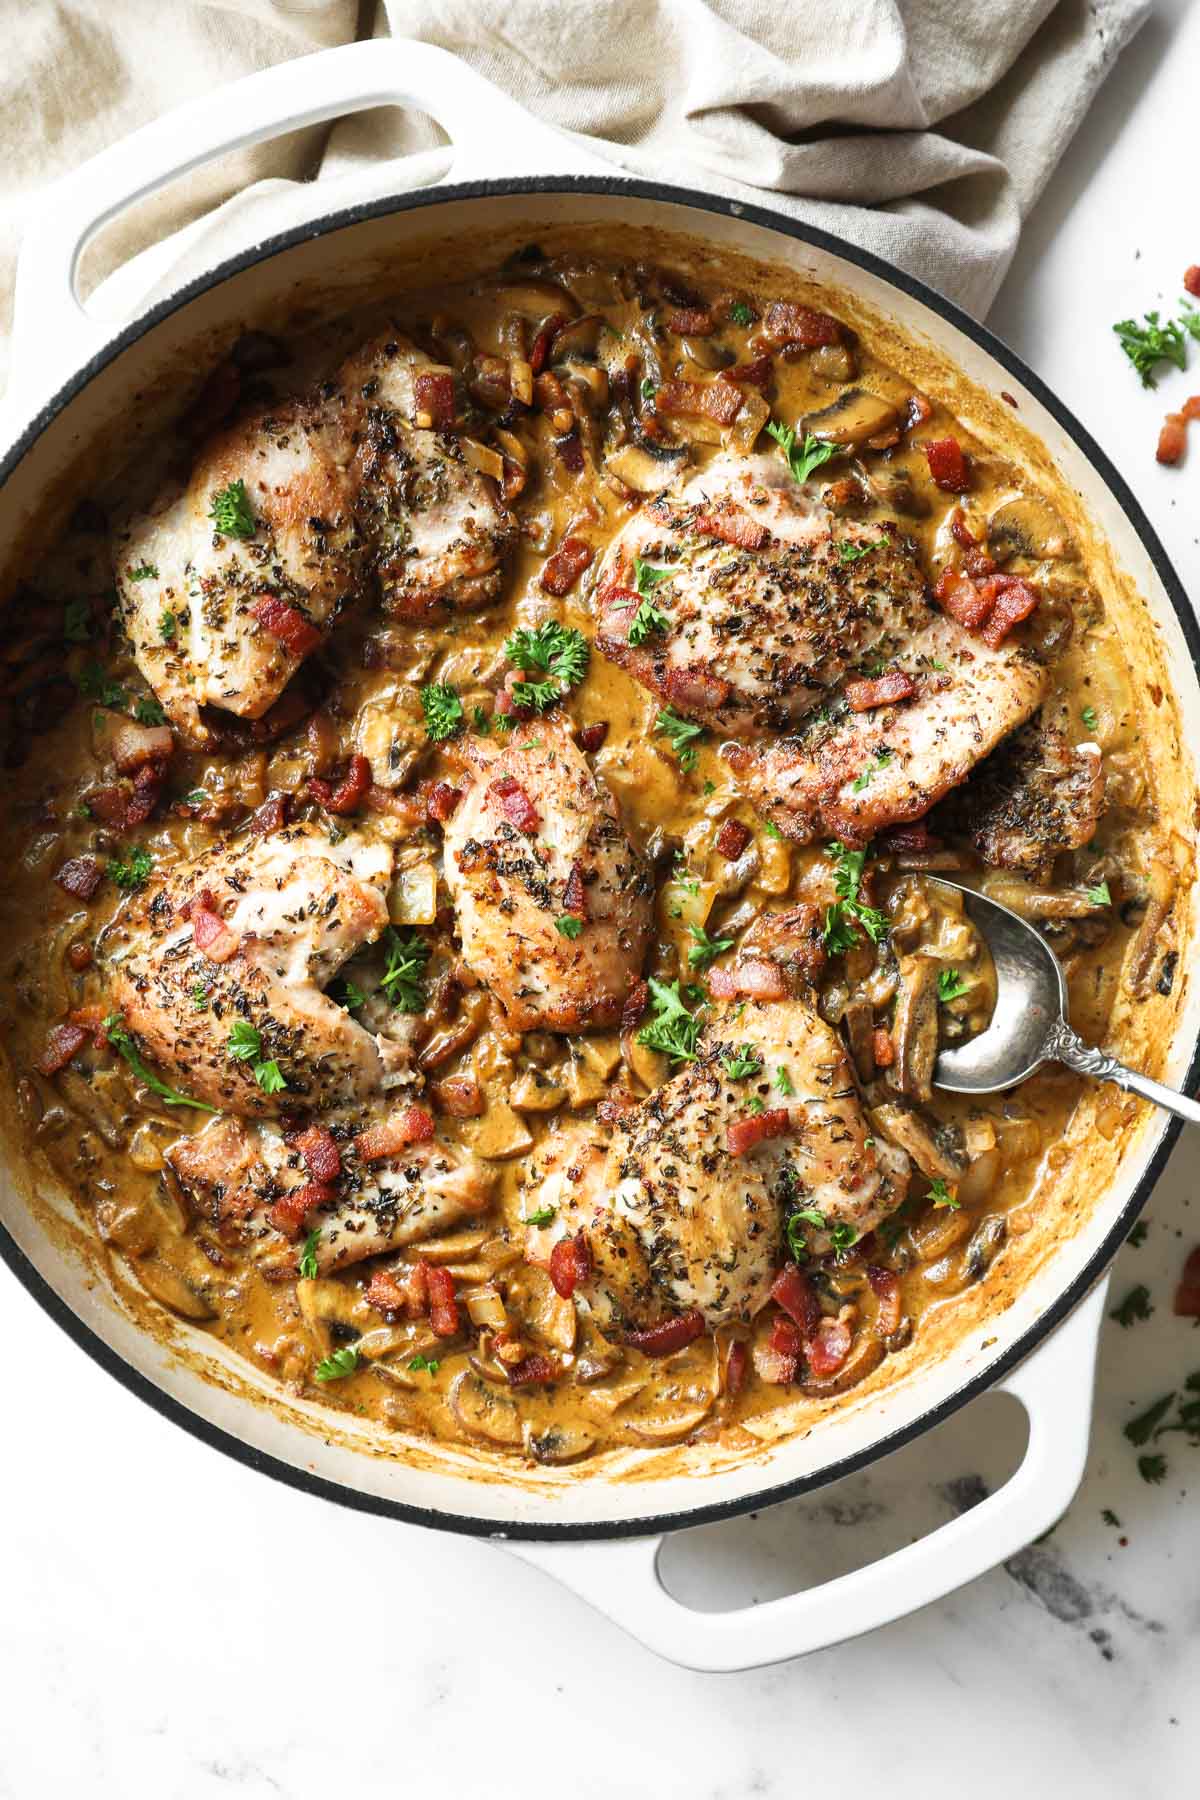 Vertical overhead image of skillet full of garlicky chicken in a creamy sauce with bacon.